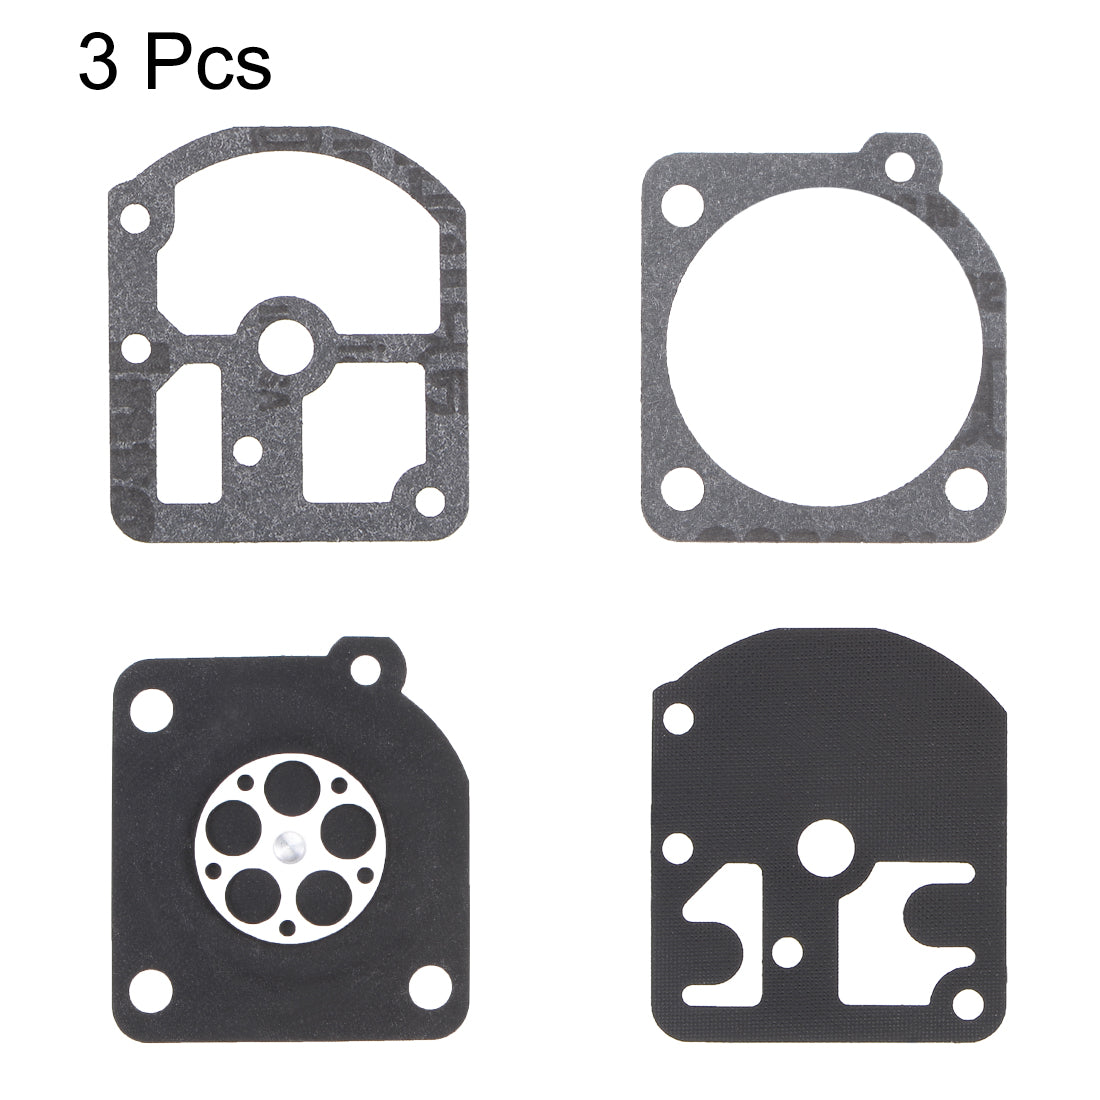 uxcell Uxcell Carburetor Rebuild Kit Gasket for 009 010  012 011AV C1S-S1A C1S-S1B Chainsaw Engines 3pcs